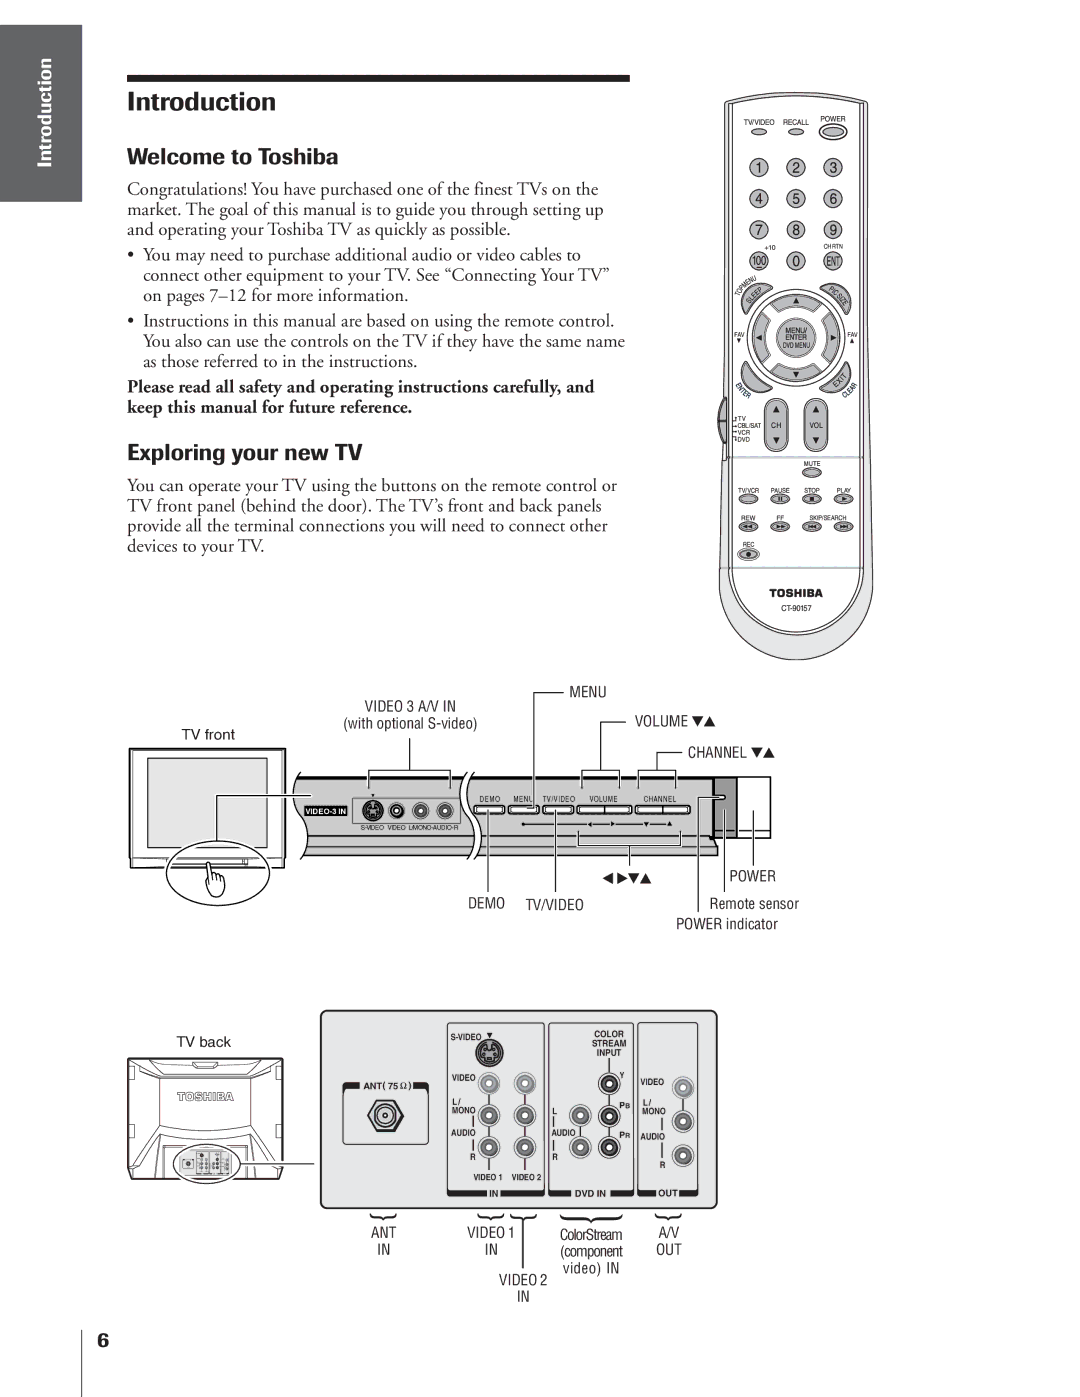 Toshiba 32AF14 owner manual Introduction, Welcome to Toshiba, Exploring your new TV 